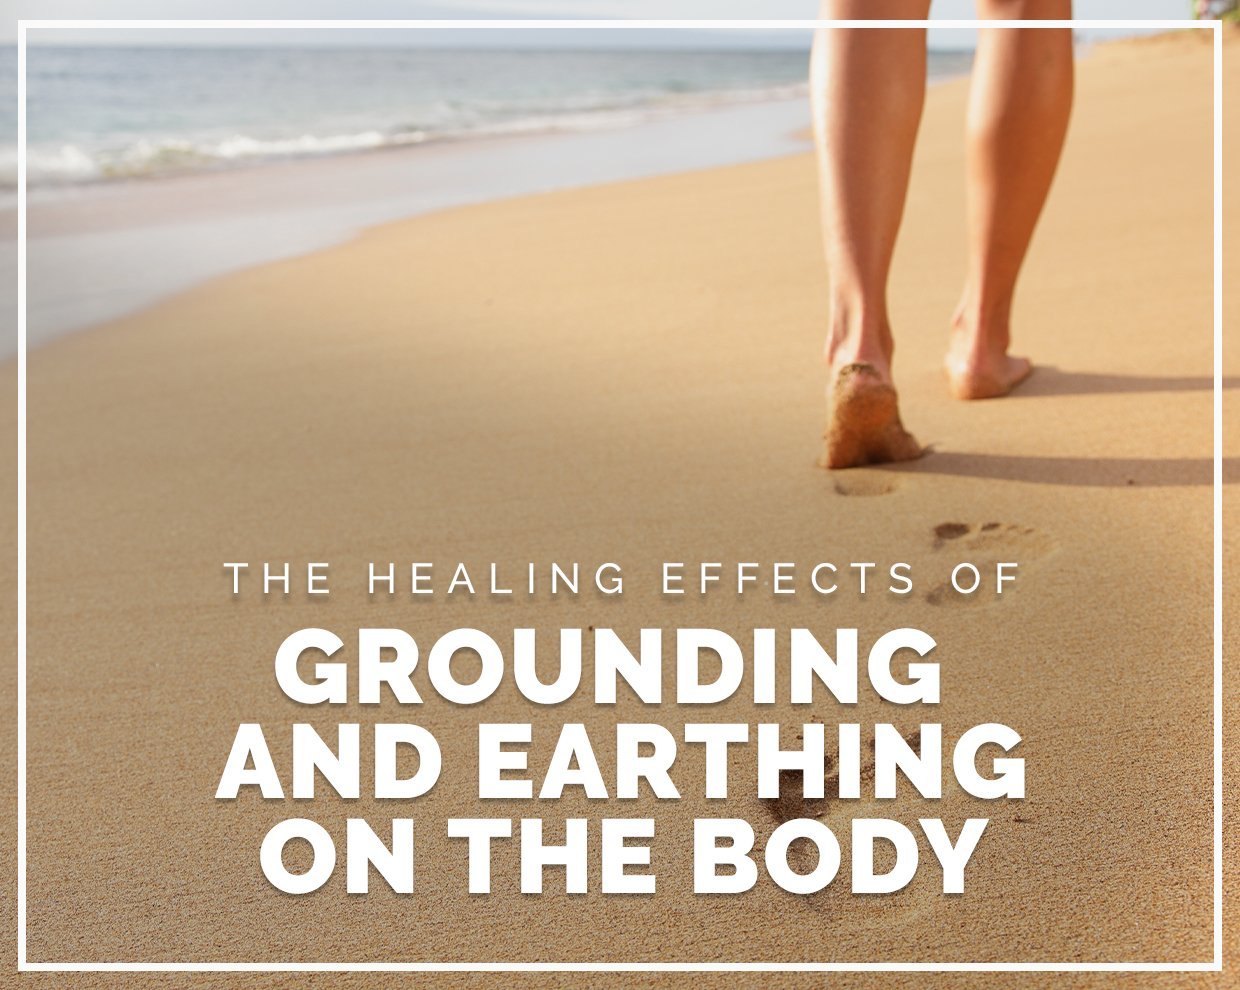 The healing effects of grounding and earthing on the body 